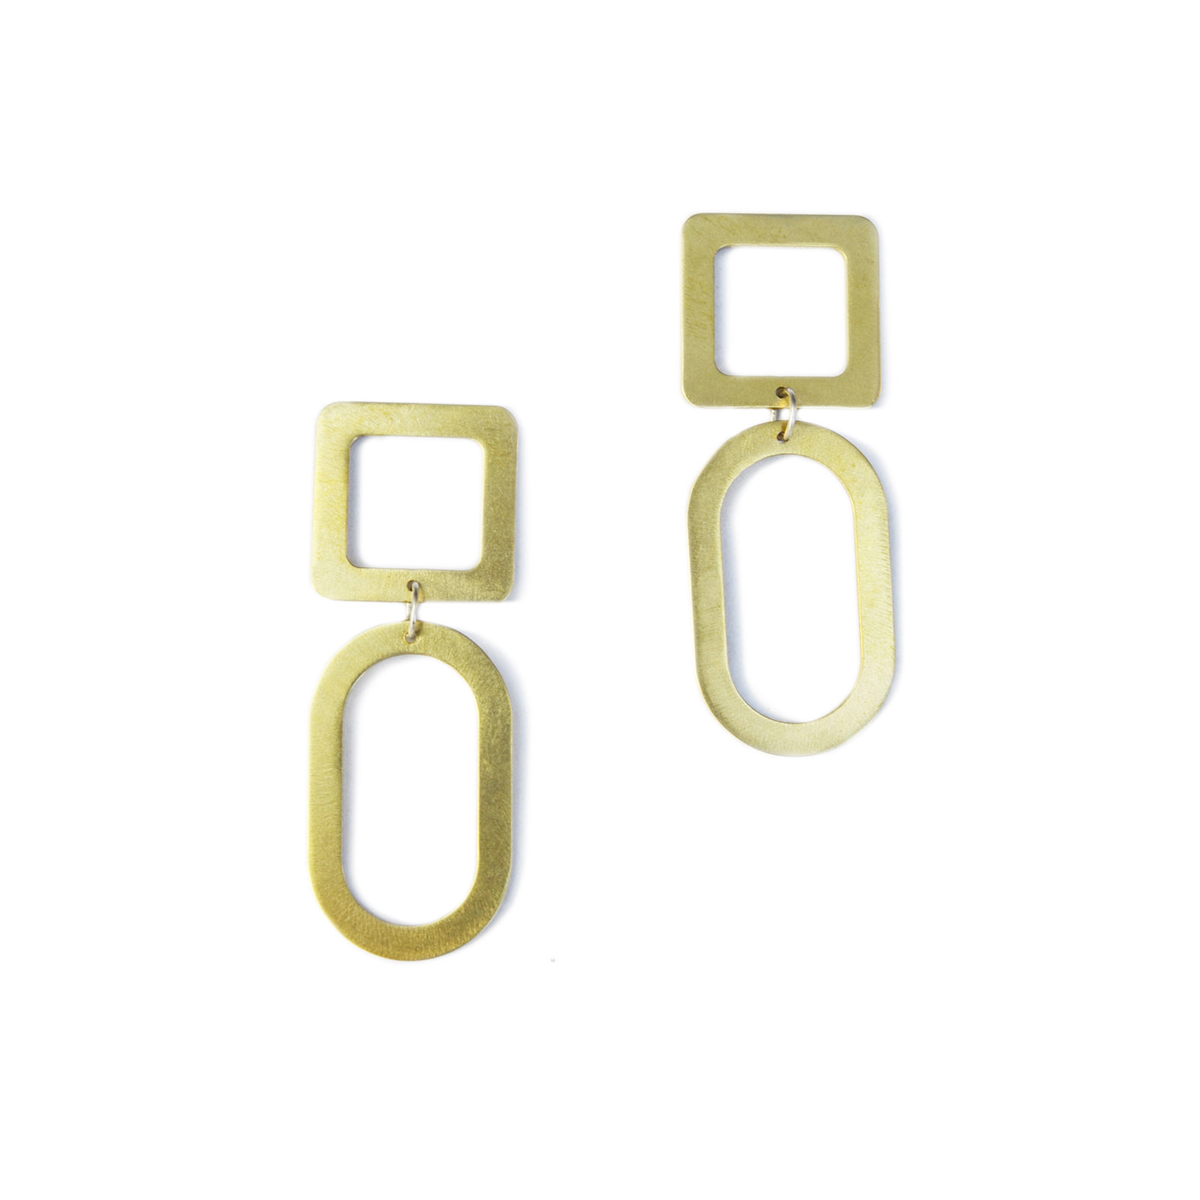 Square Oval Earrings